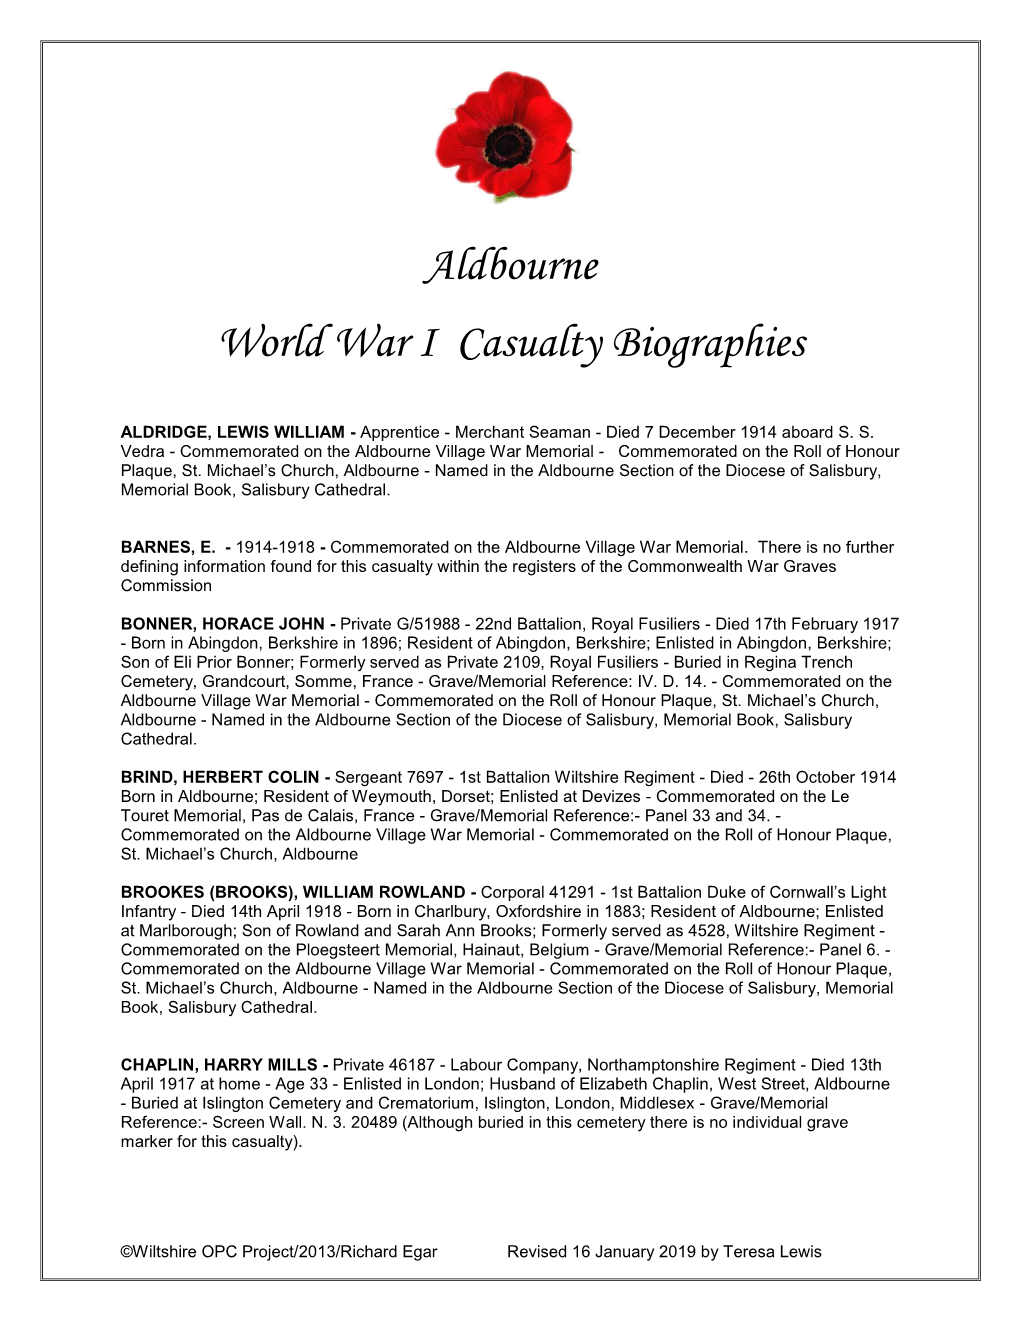 Aldbourne World War I Casualty Biographies